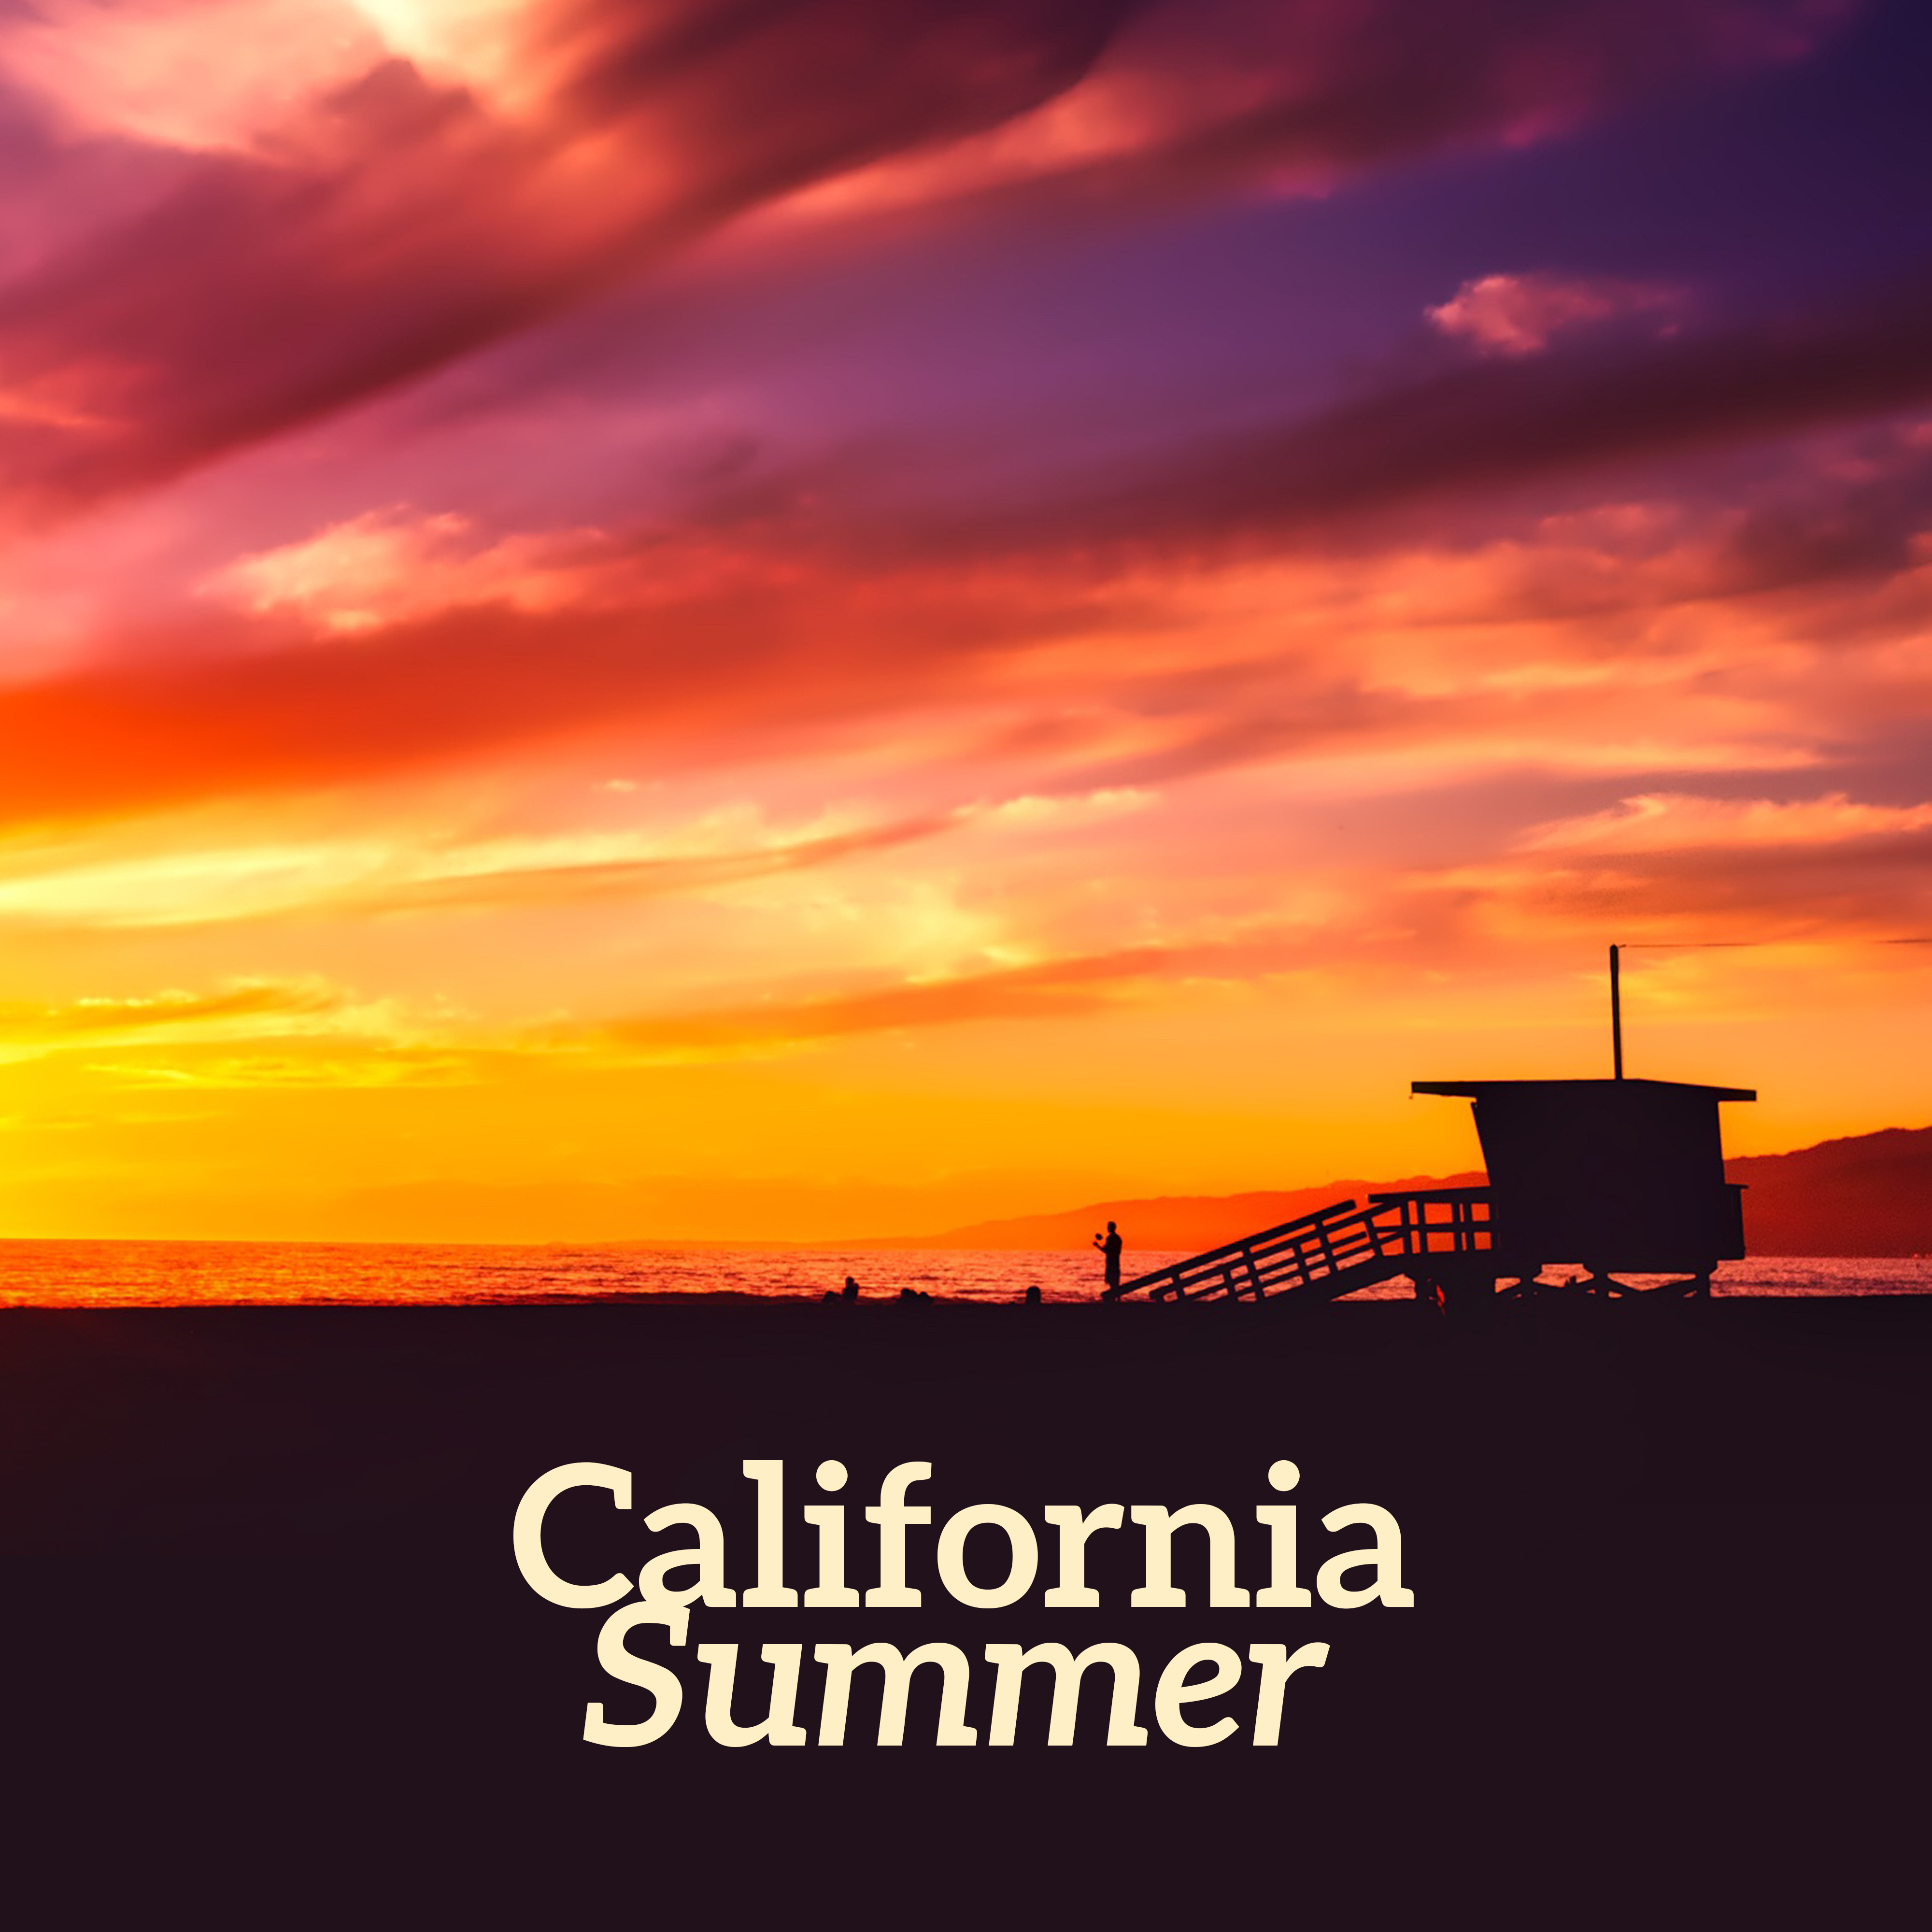 California Summer – Chillout Music, Relax, Summertime, Downbeats Tunes, Lounge